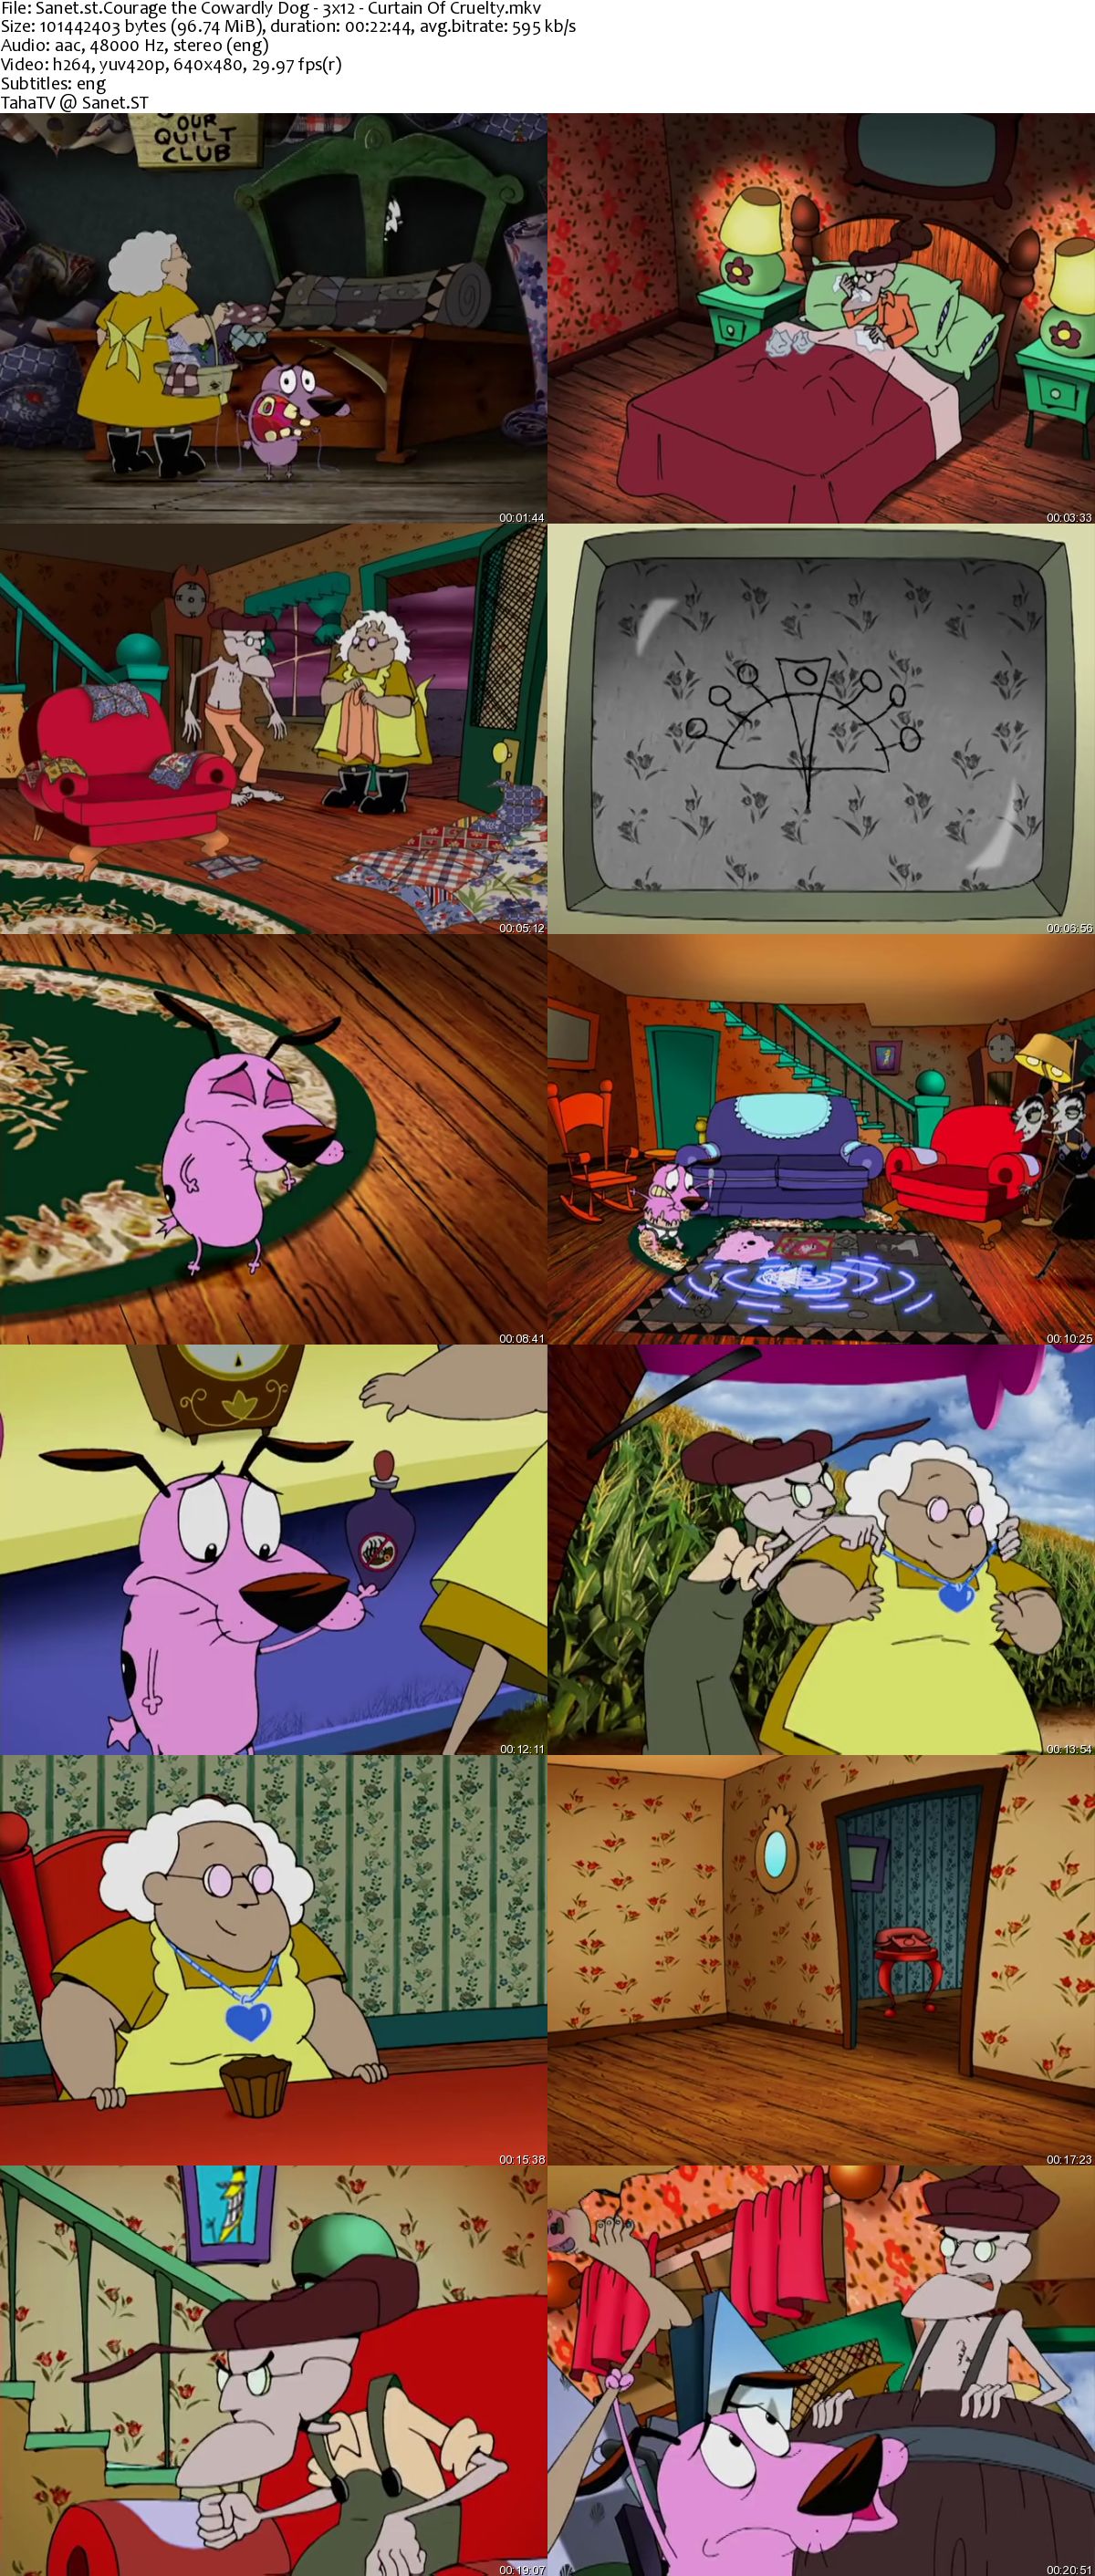 Courage the Cowardly Dog S03 480p X264-jlw.